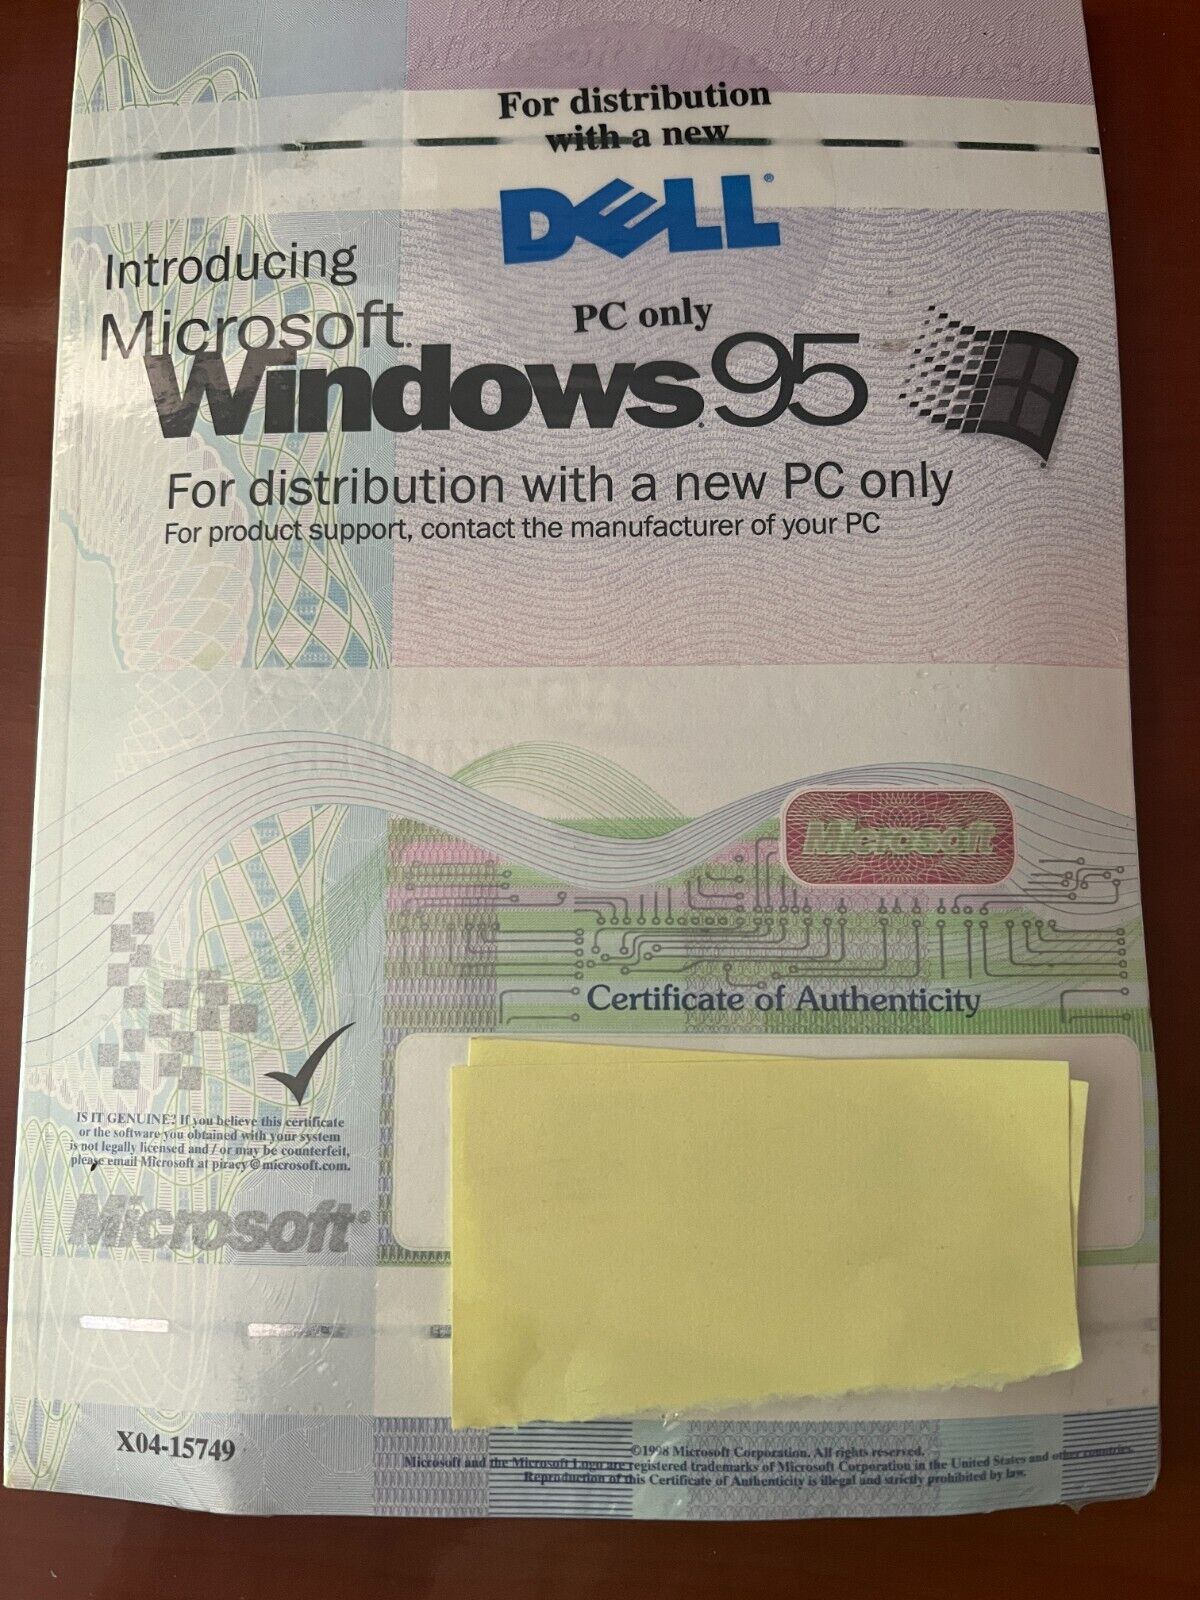 Introducing Microsoft Windows 95 For Distribution With A New PC Only CD & Disk